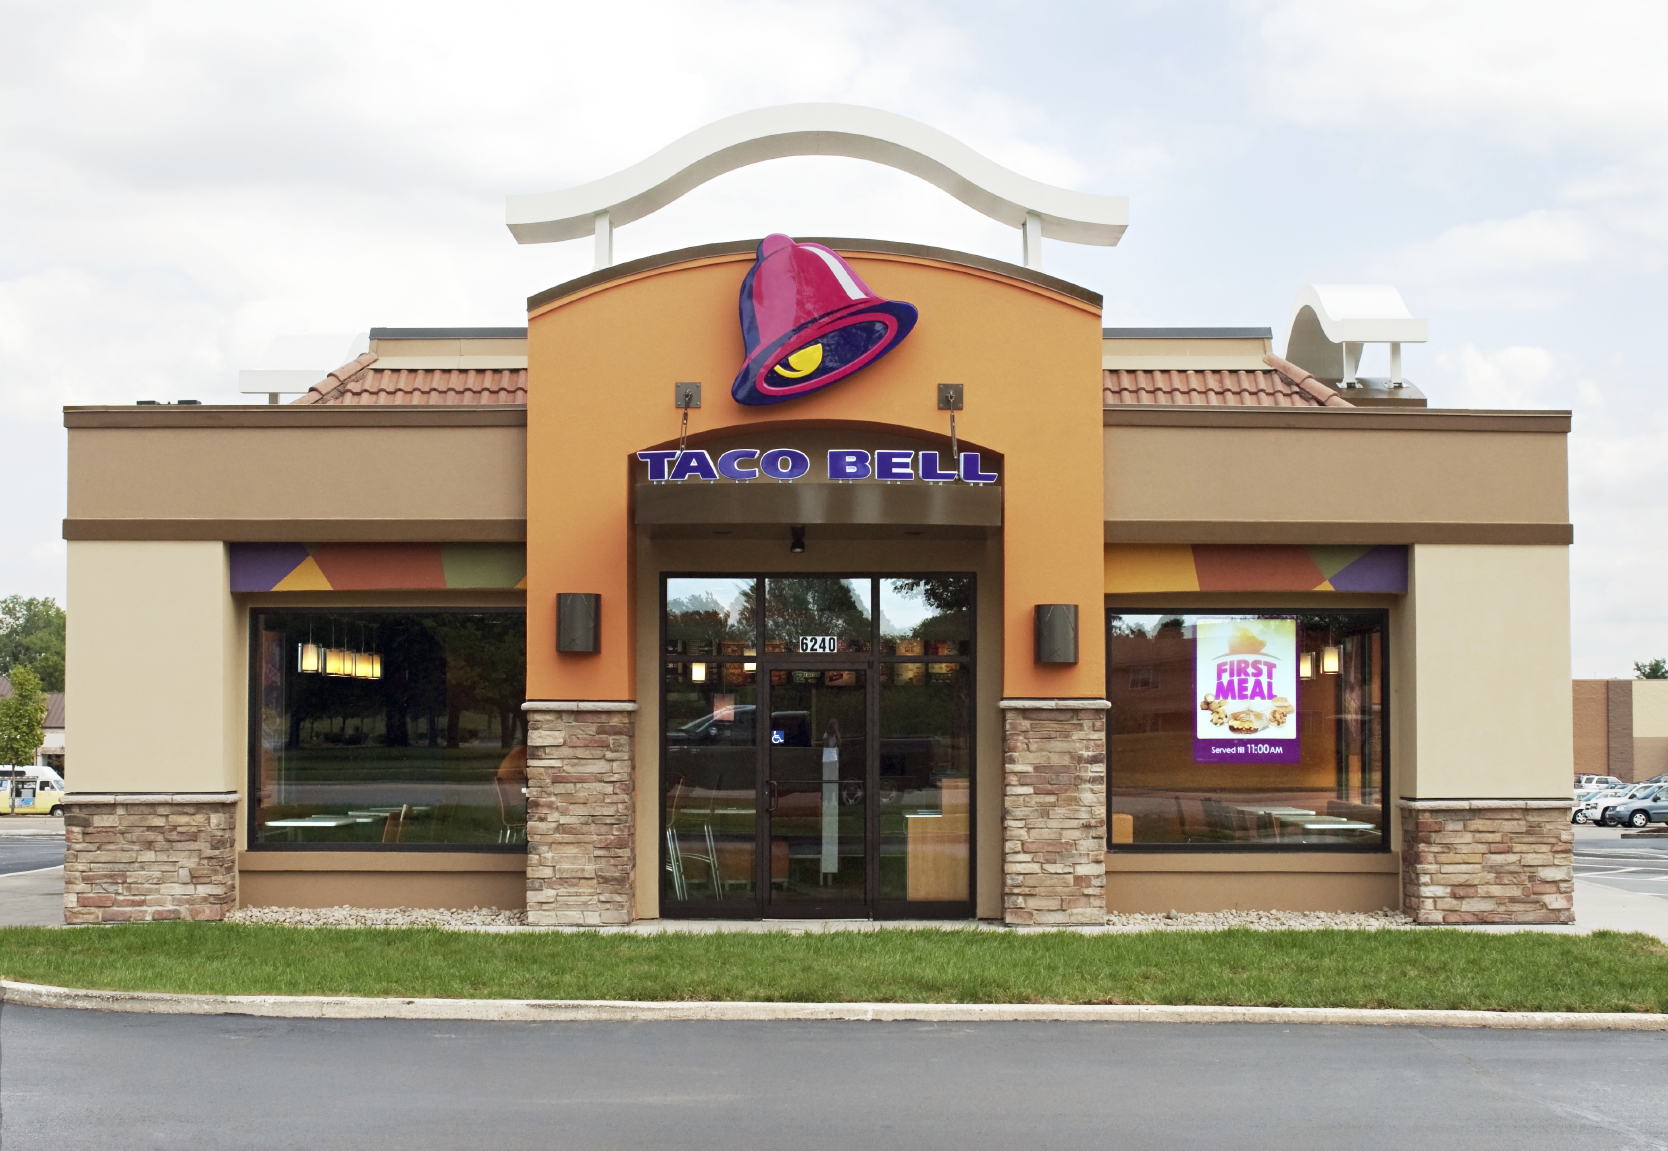 Taco Bell tried to come clean about what’s really in their products. It raised even more questions… But this may be the most disturbing secret ingredient of all.